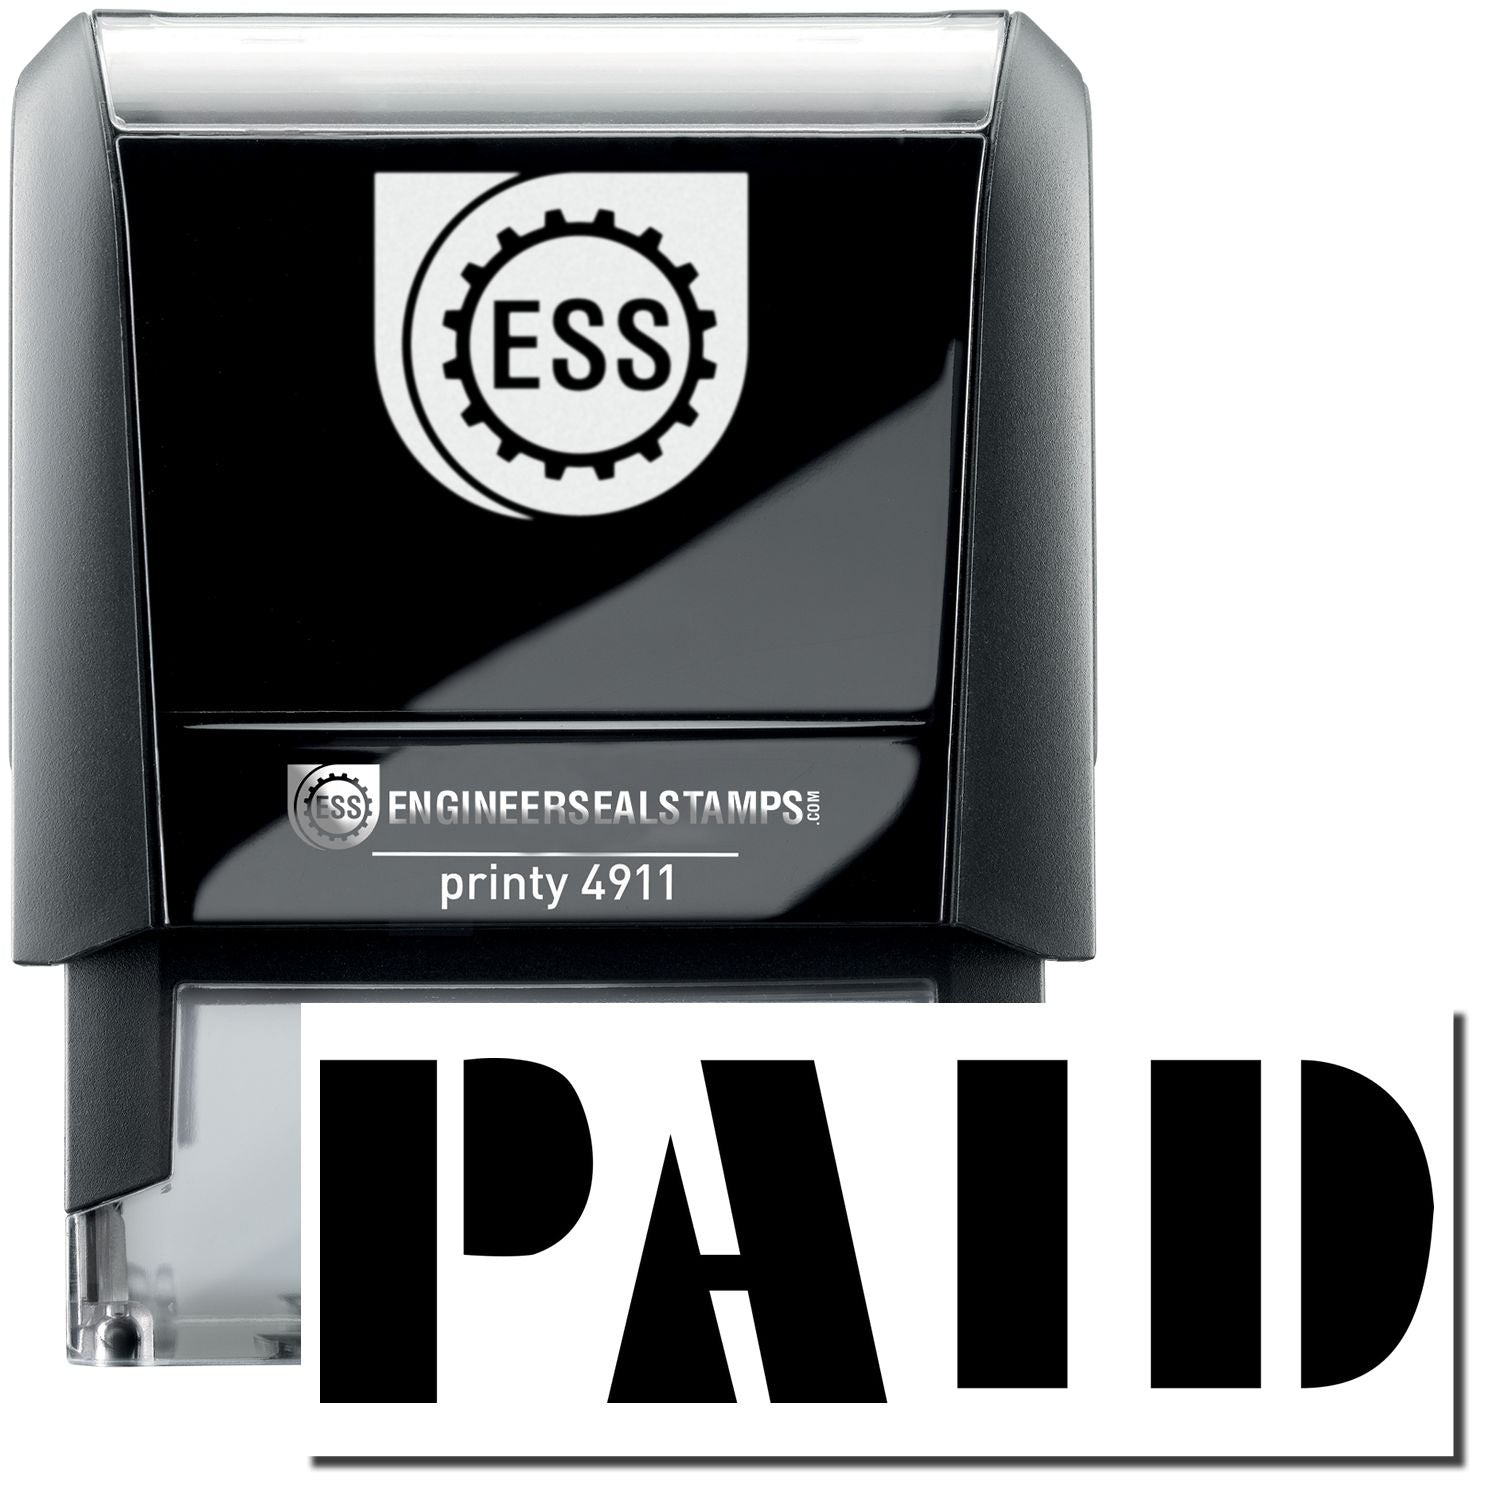 A self-inking stamp with a stamped image showing how the text "PAID" in bold font is displayed after stamping.